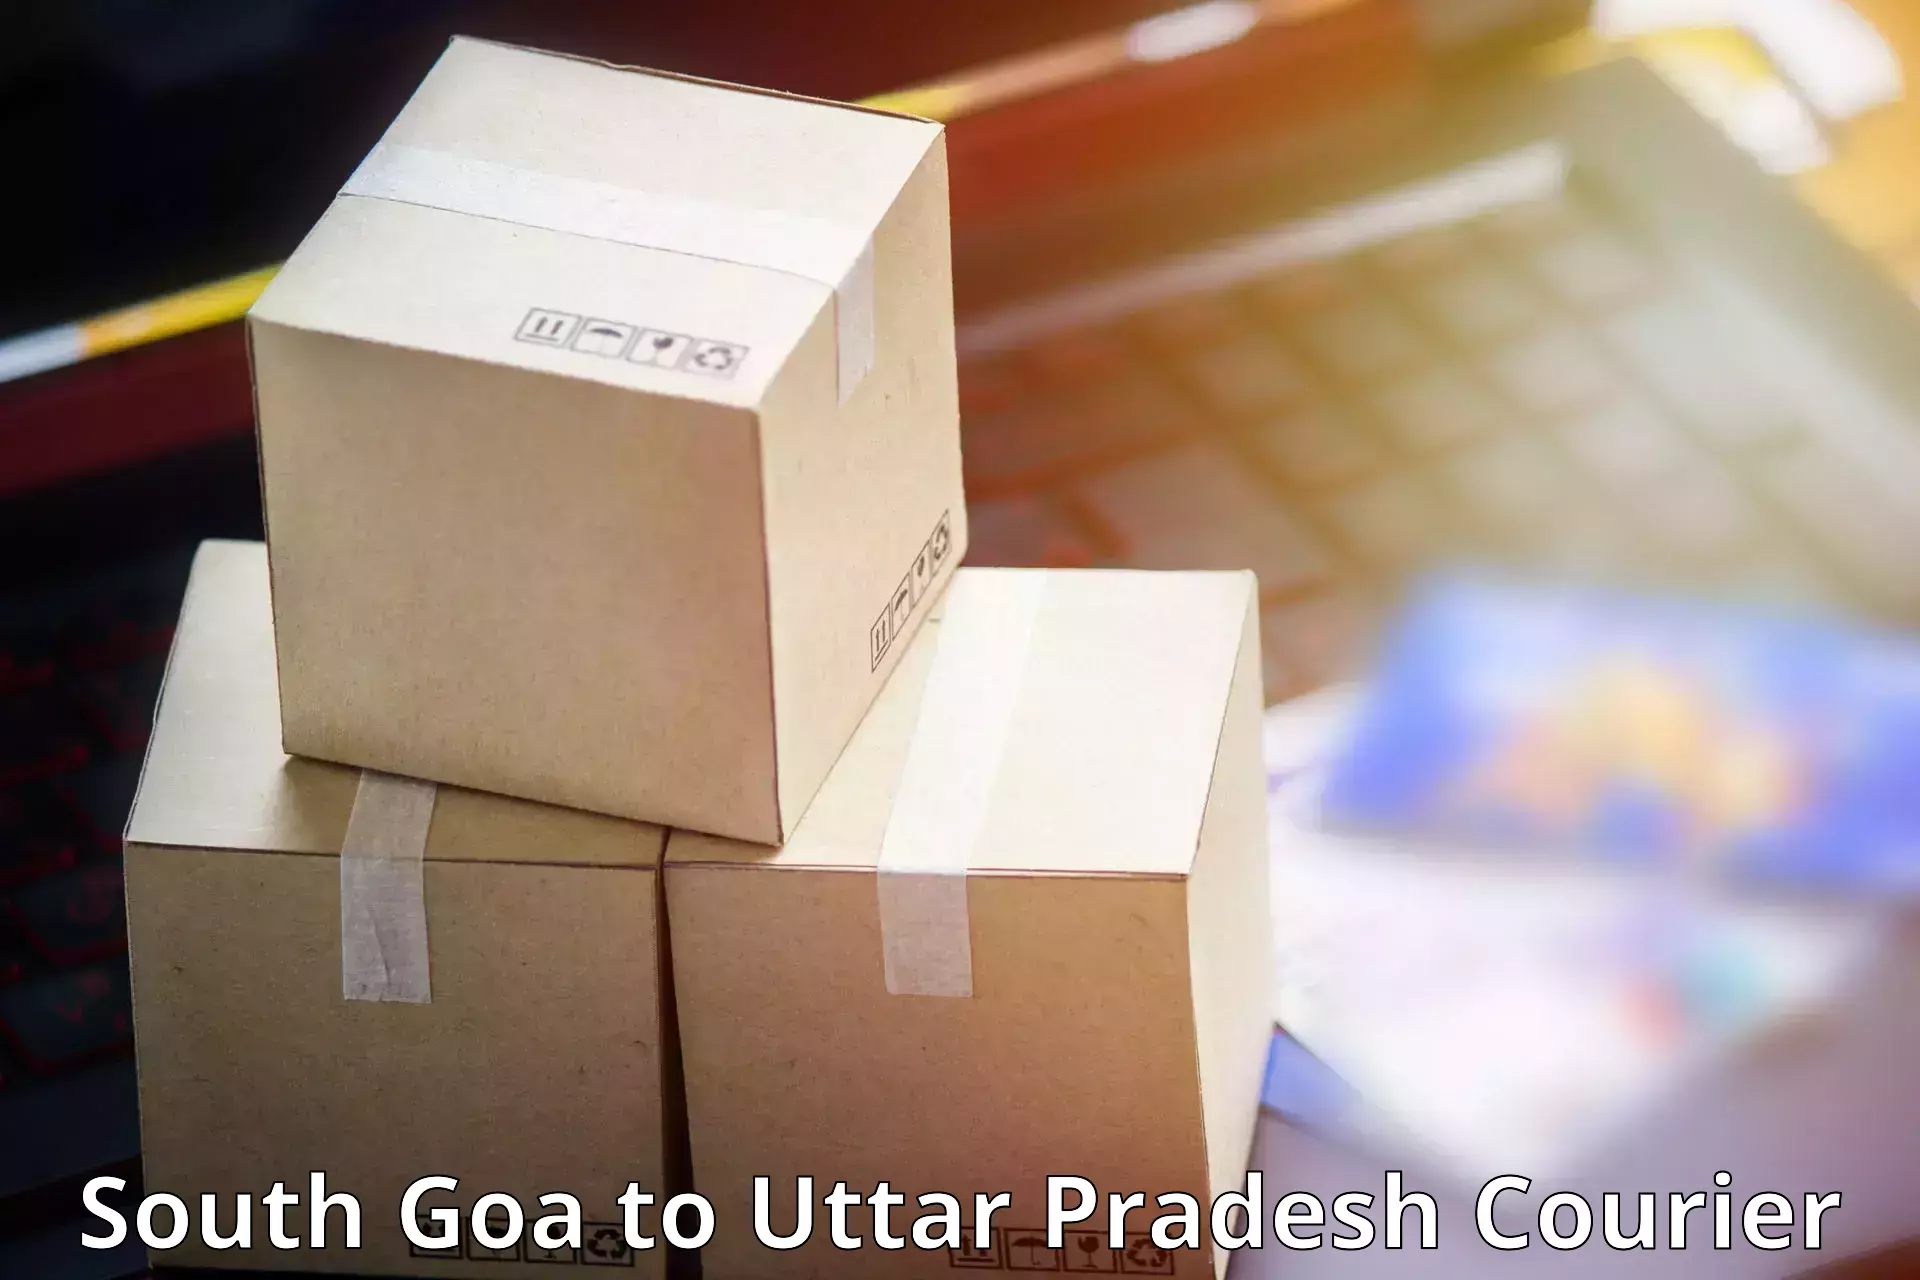 Personal courier services South Goa to Mariahu